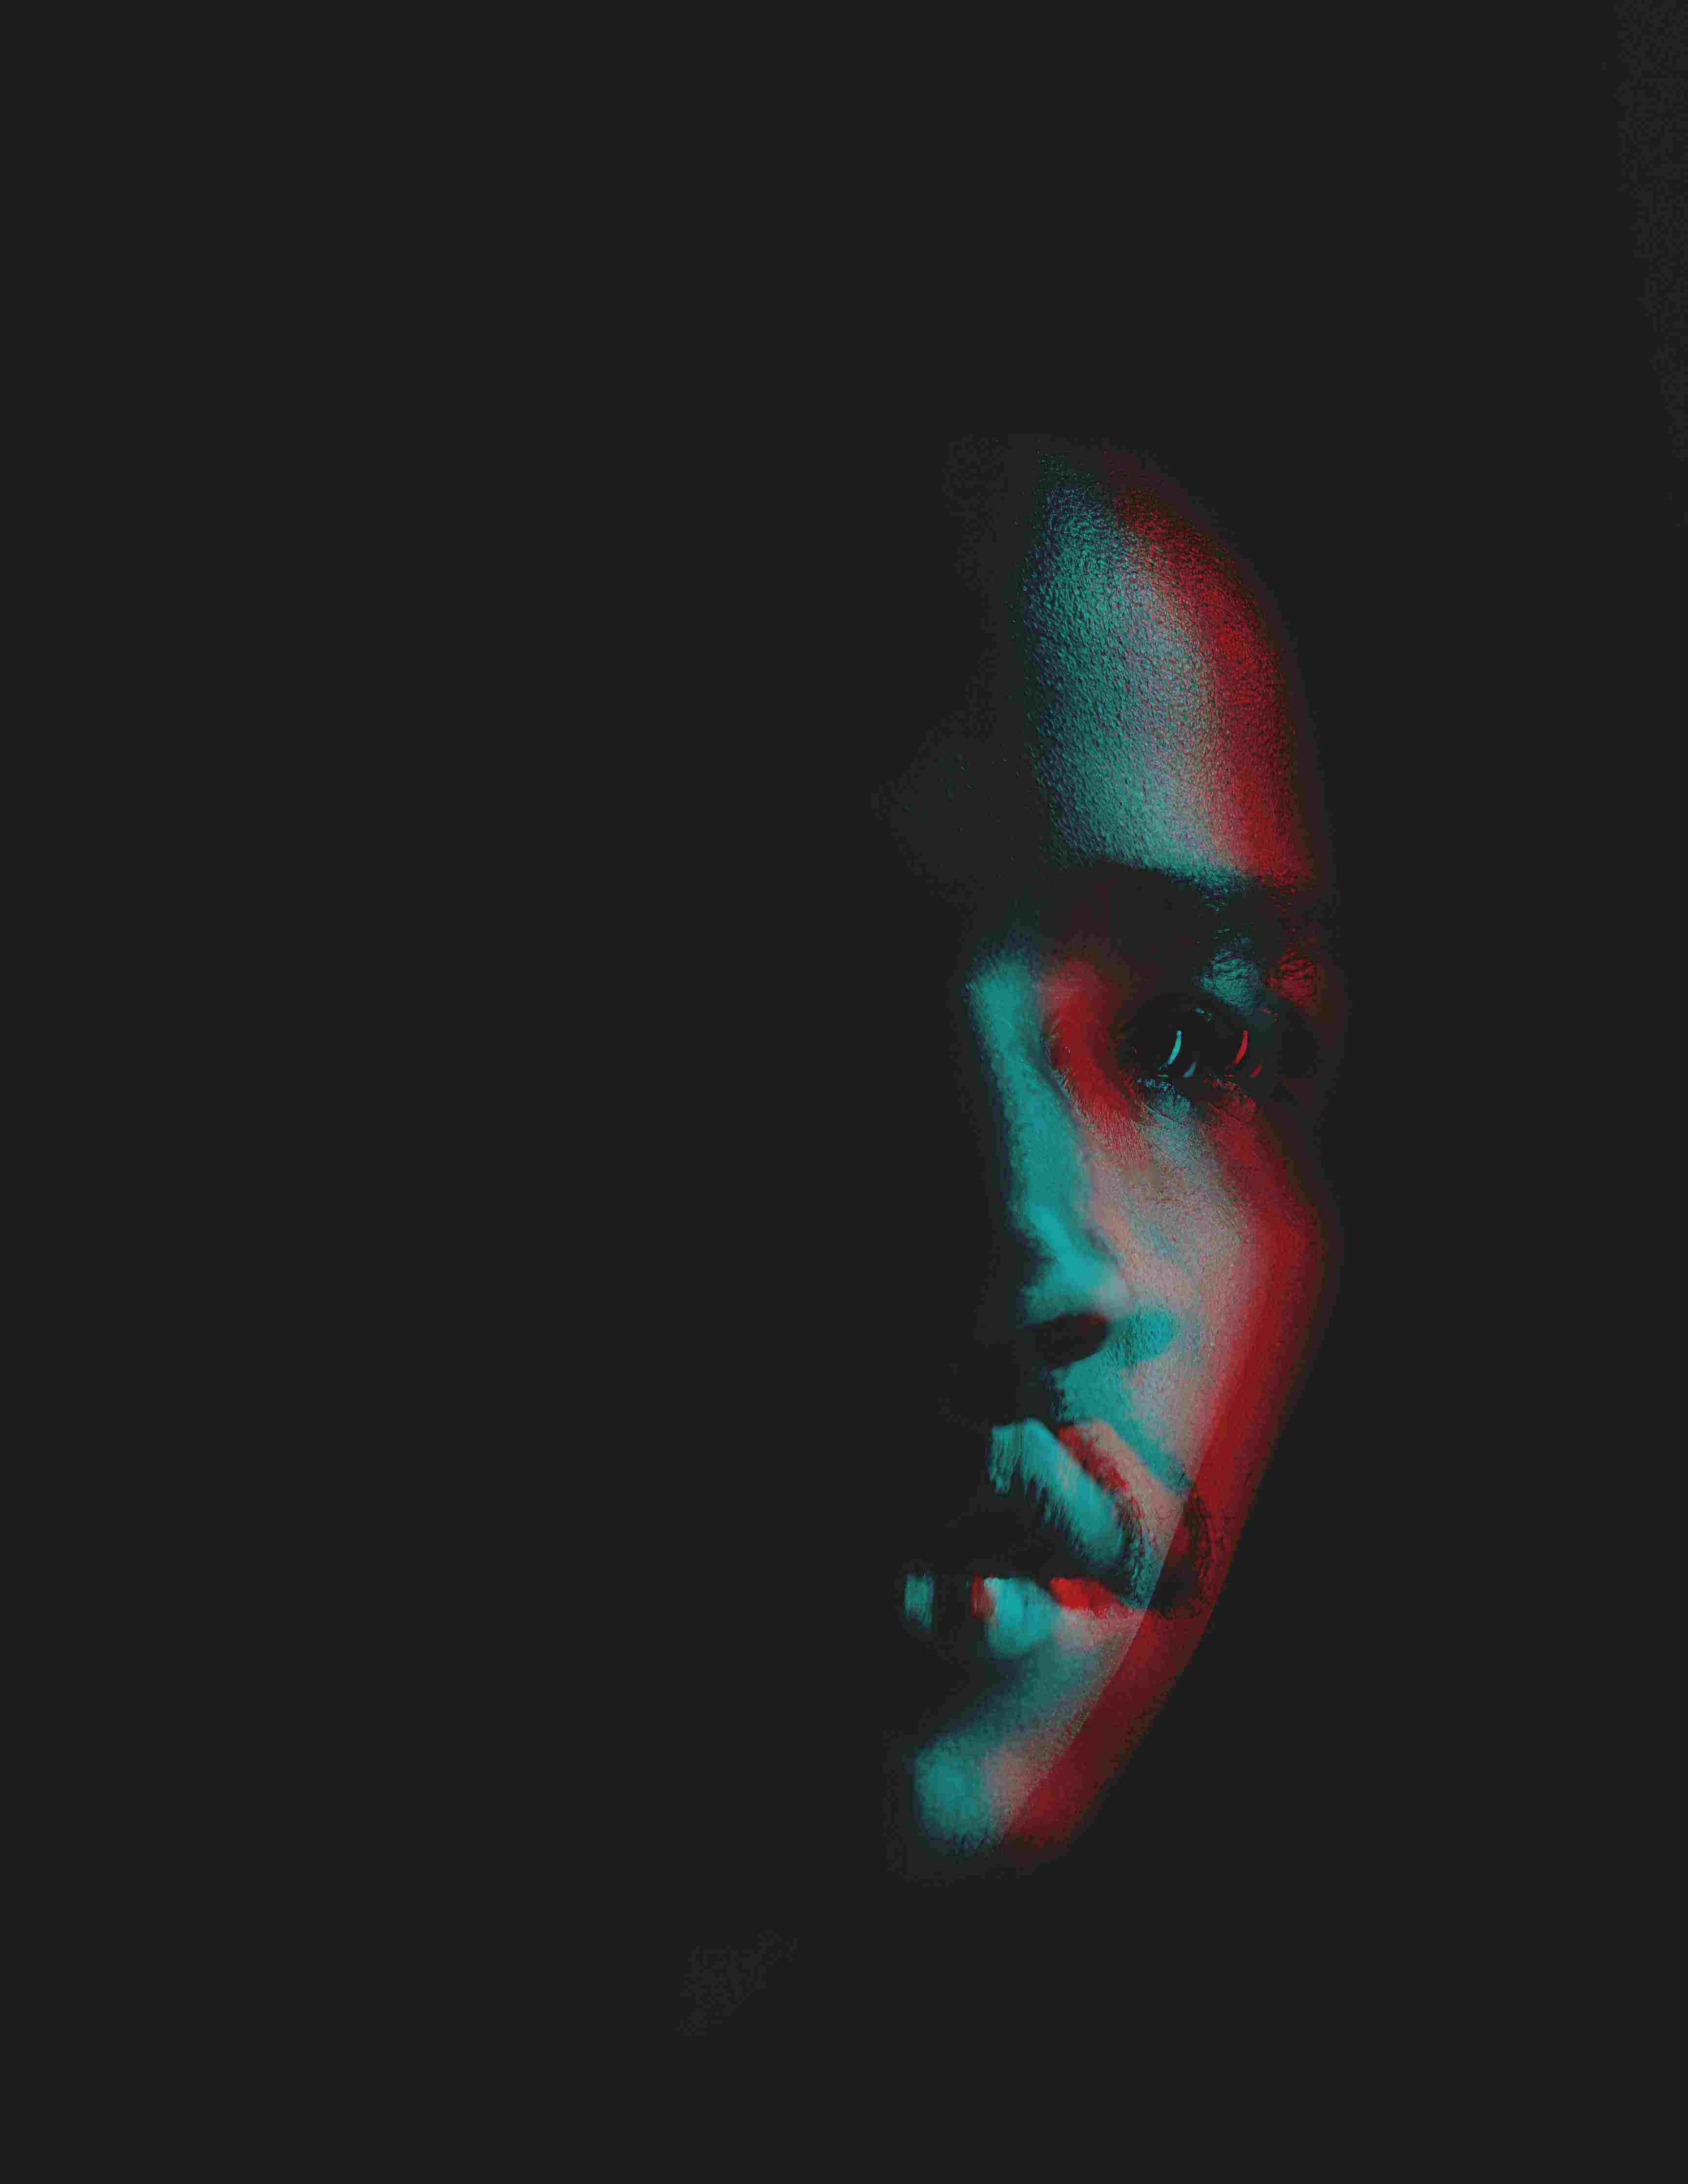 1/3 visible profile view of a Black man's face on a dark background, with a slightly out of focus effect that gives an almost prismatic hue to his skin